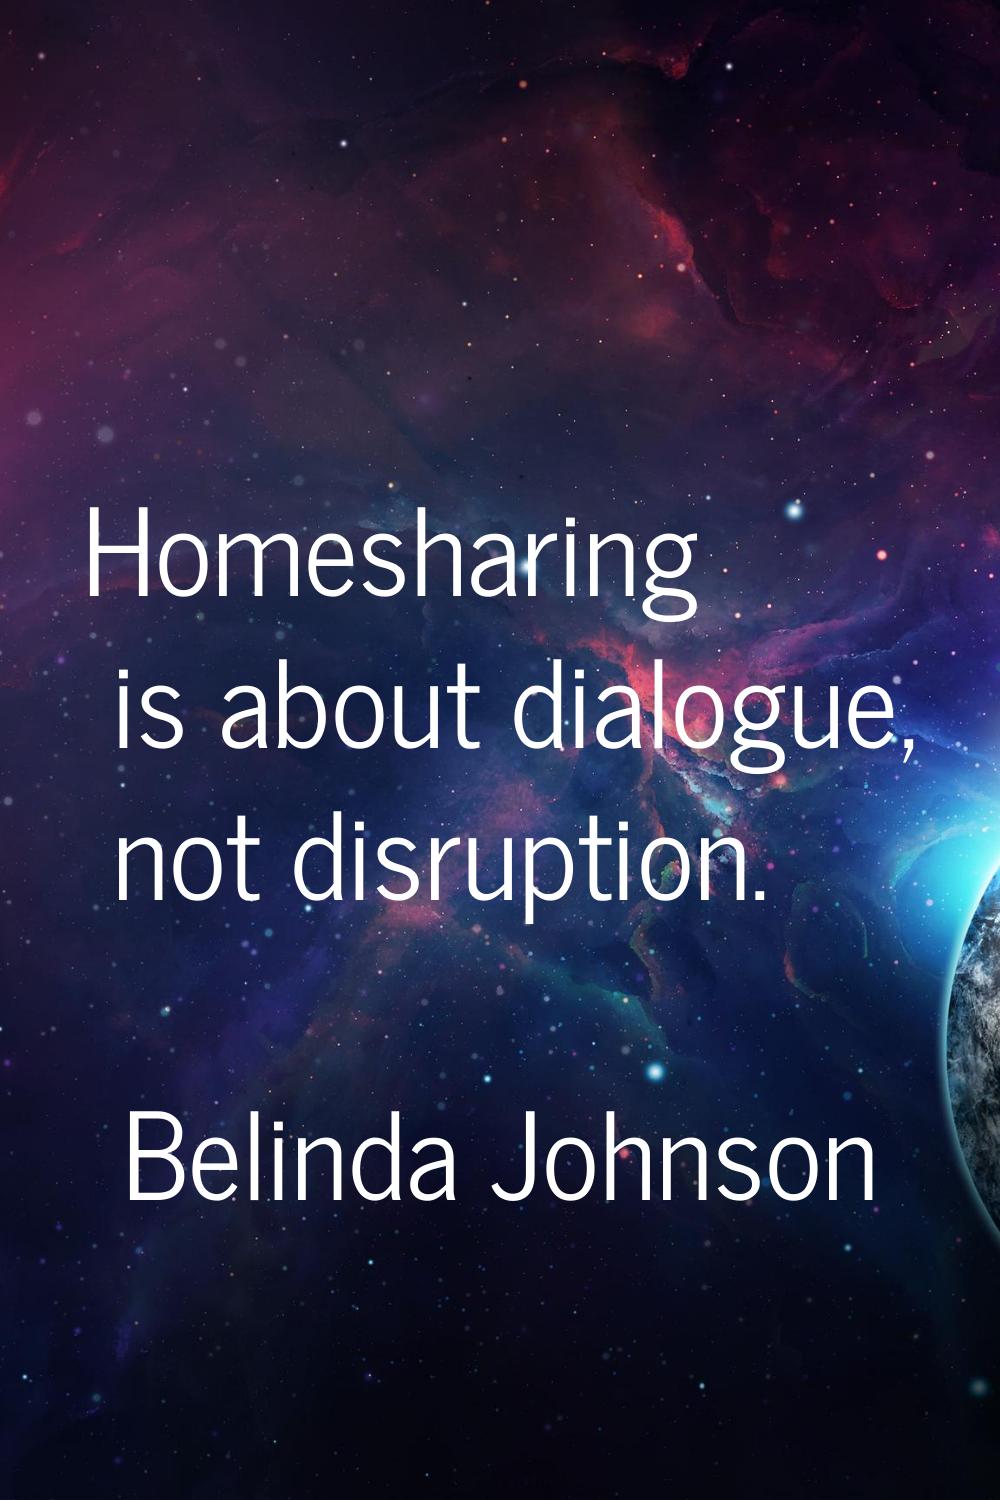 Homesharing is about dialogue, not disruption.